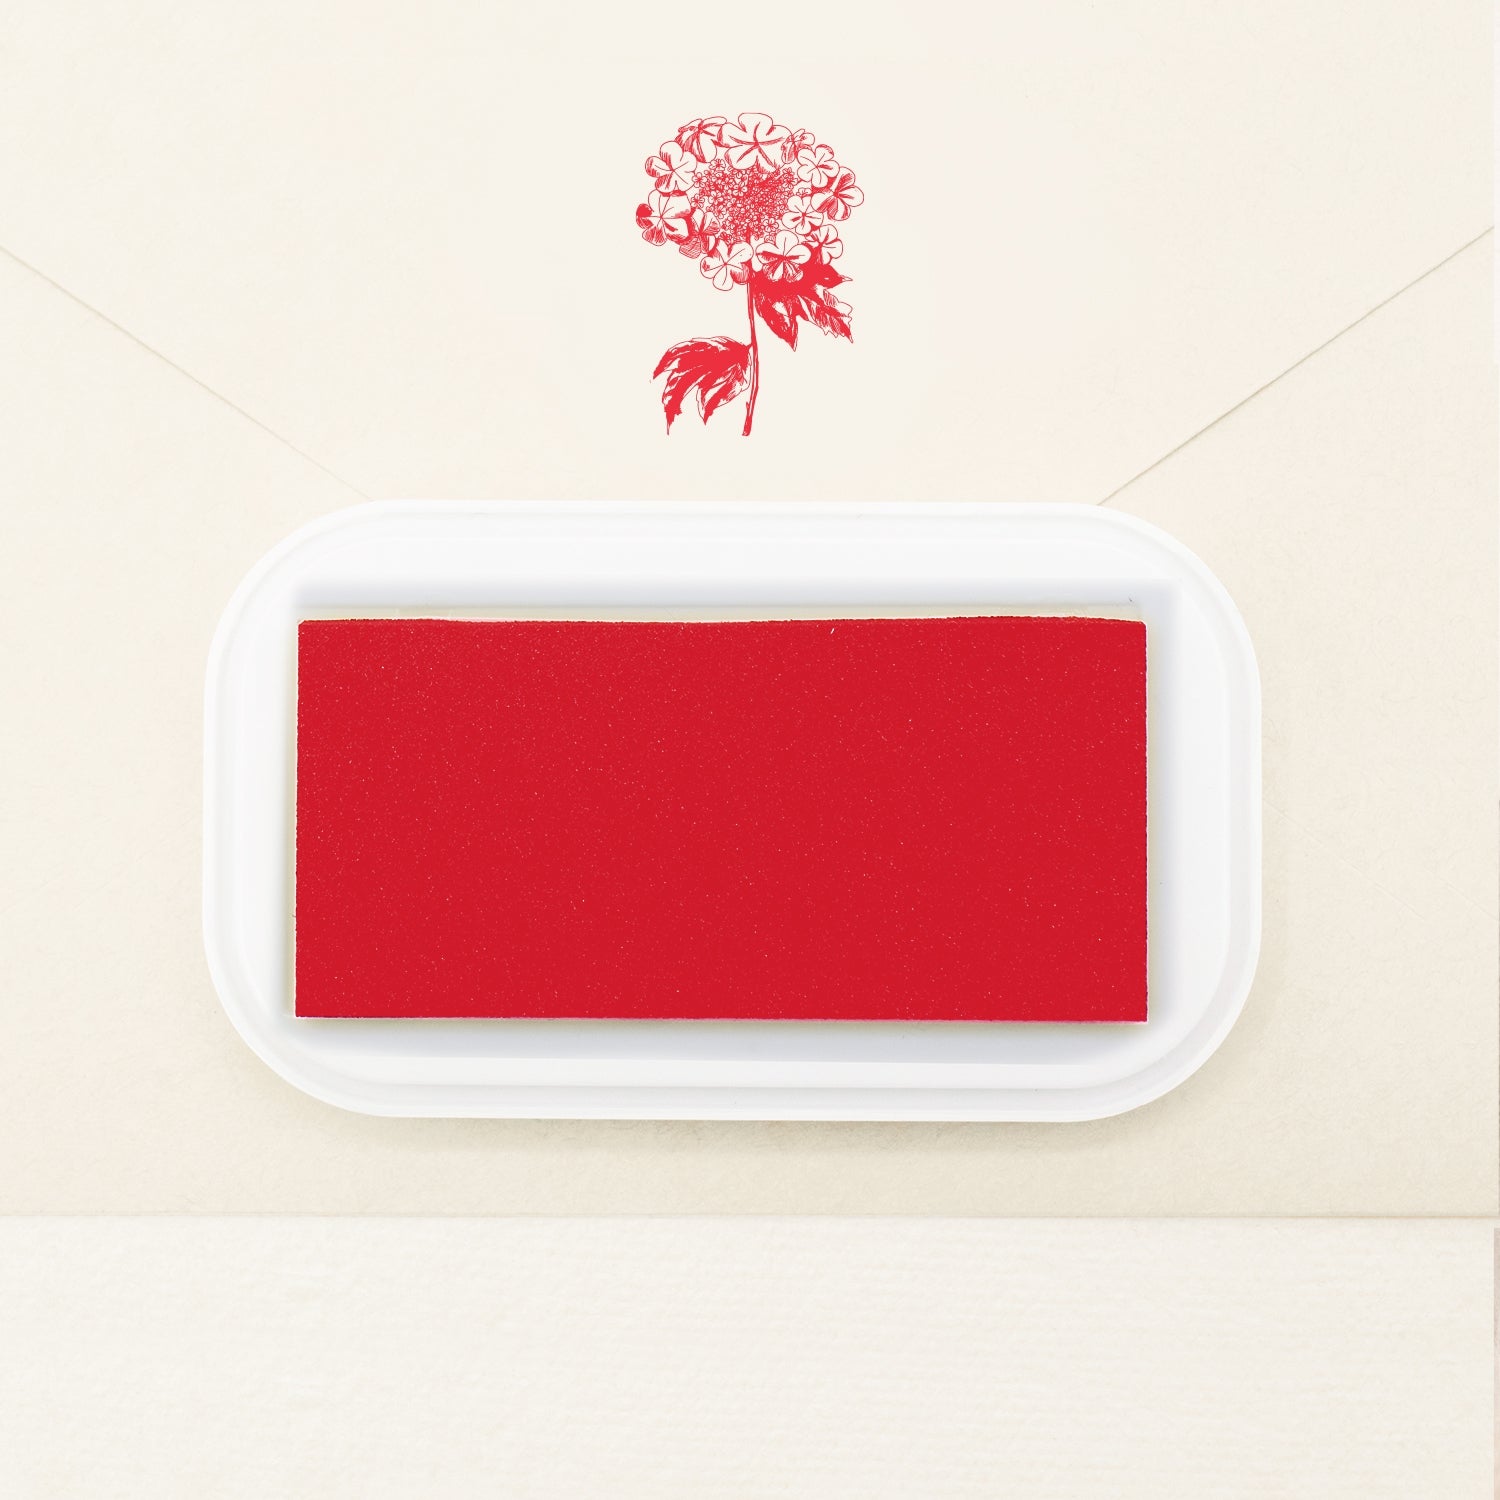 Oil-Based Fabric Ink Pad - Poppy Red BD-214a